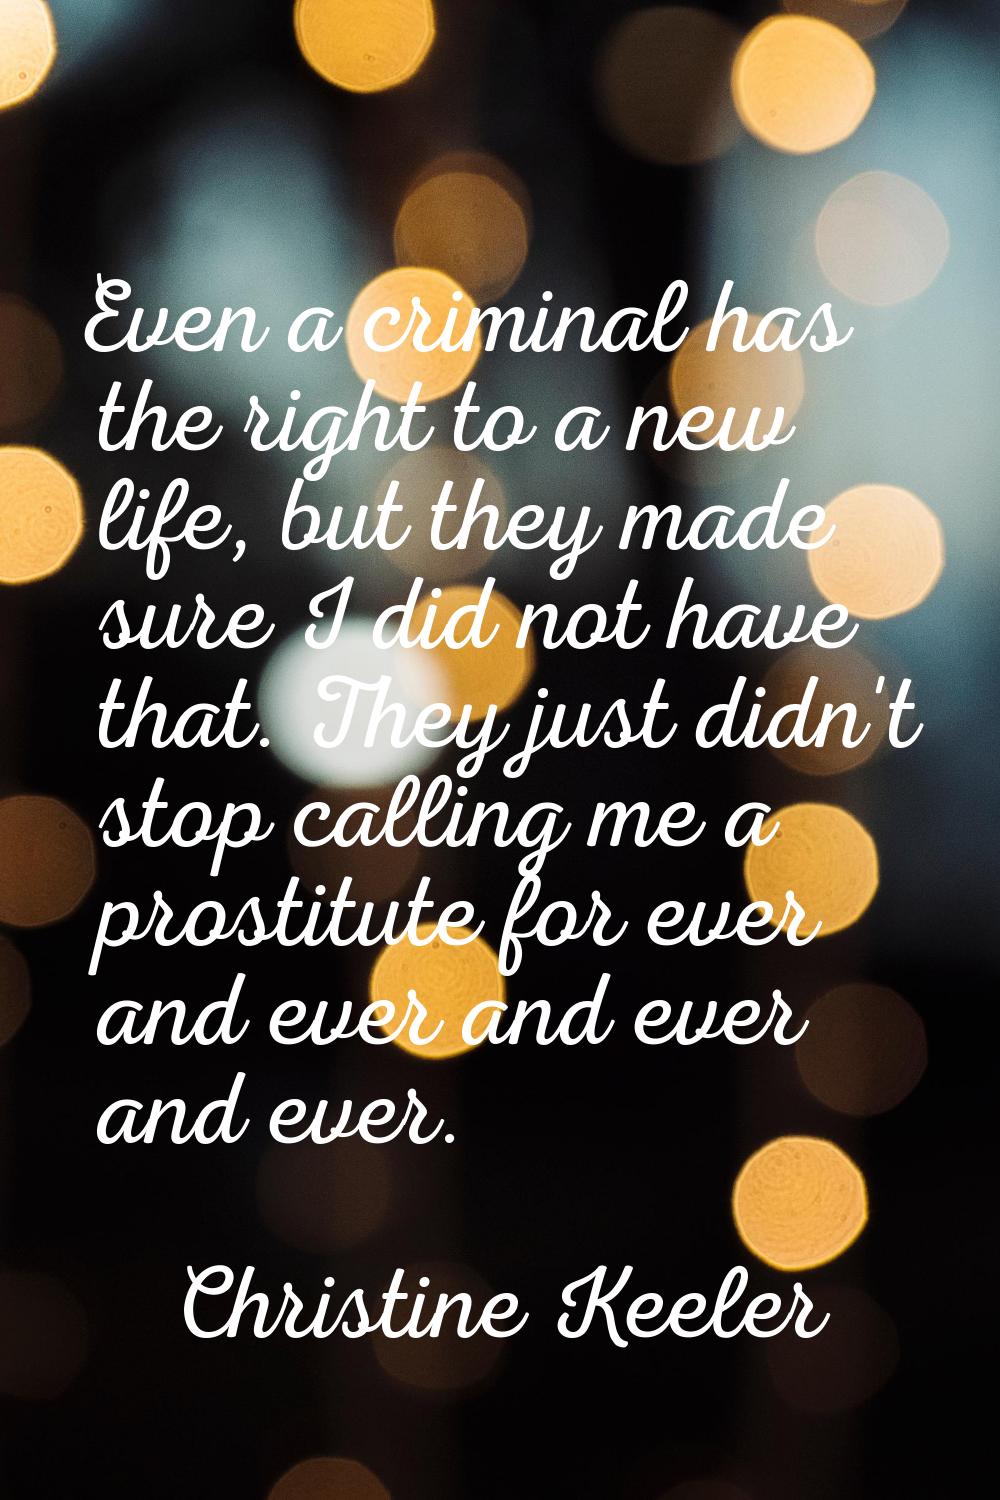 Even a criminal has the right to a new life, but they made sure I did not have that. They just didn